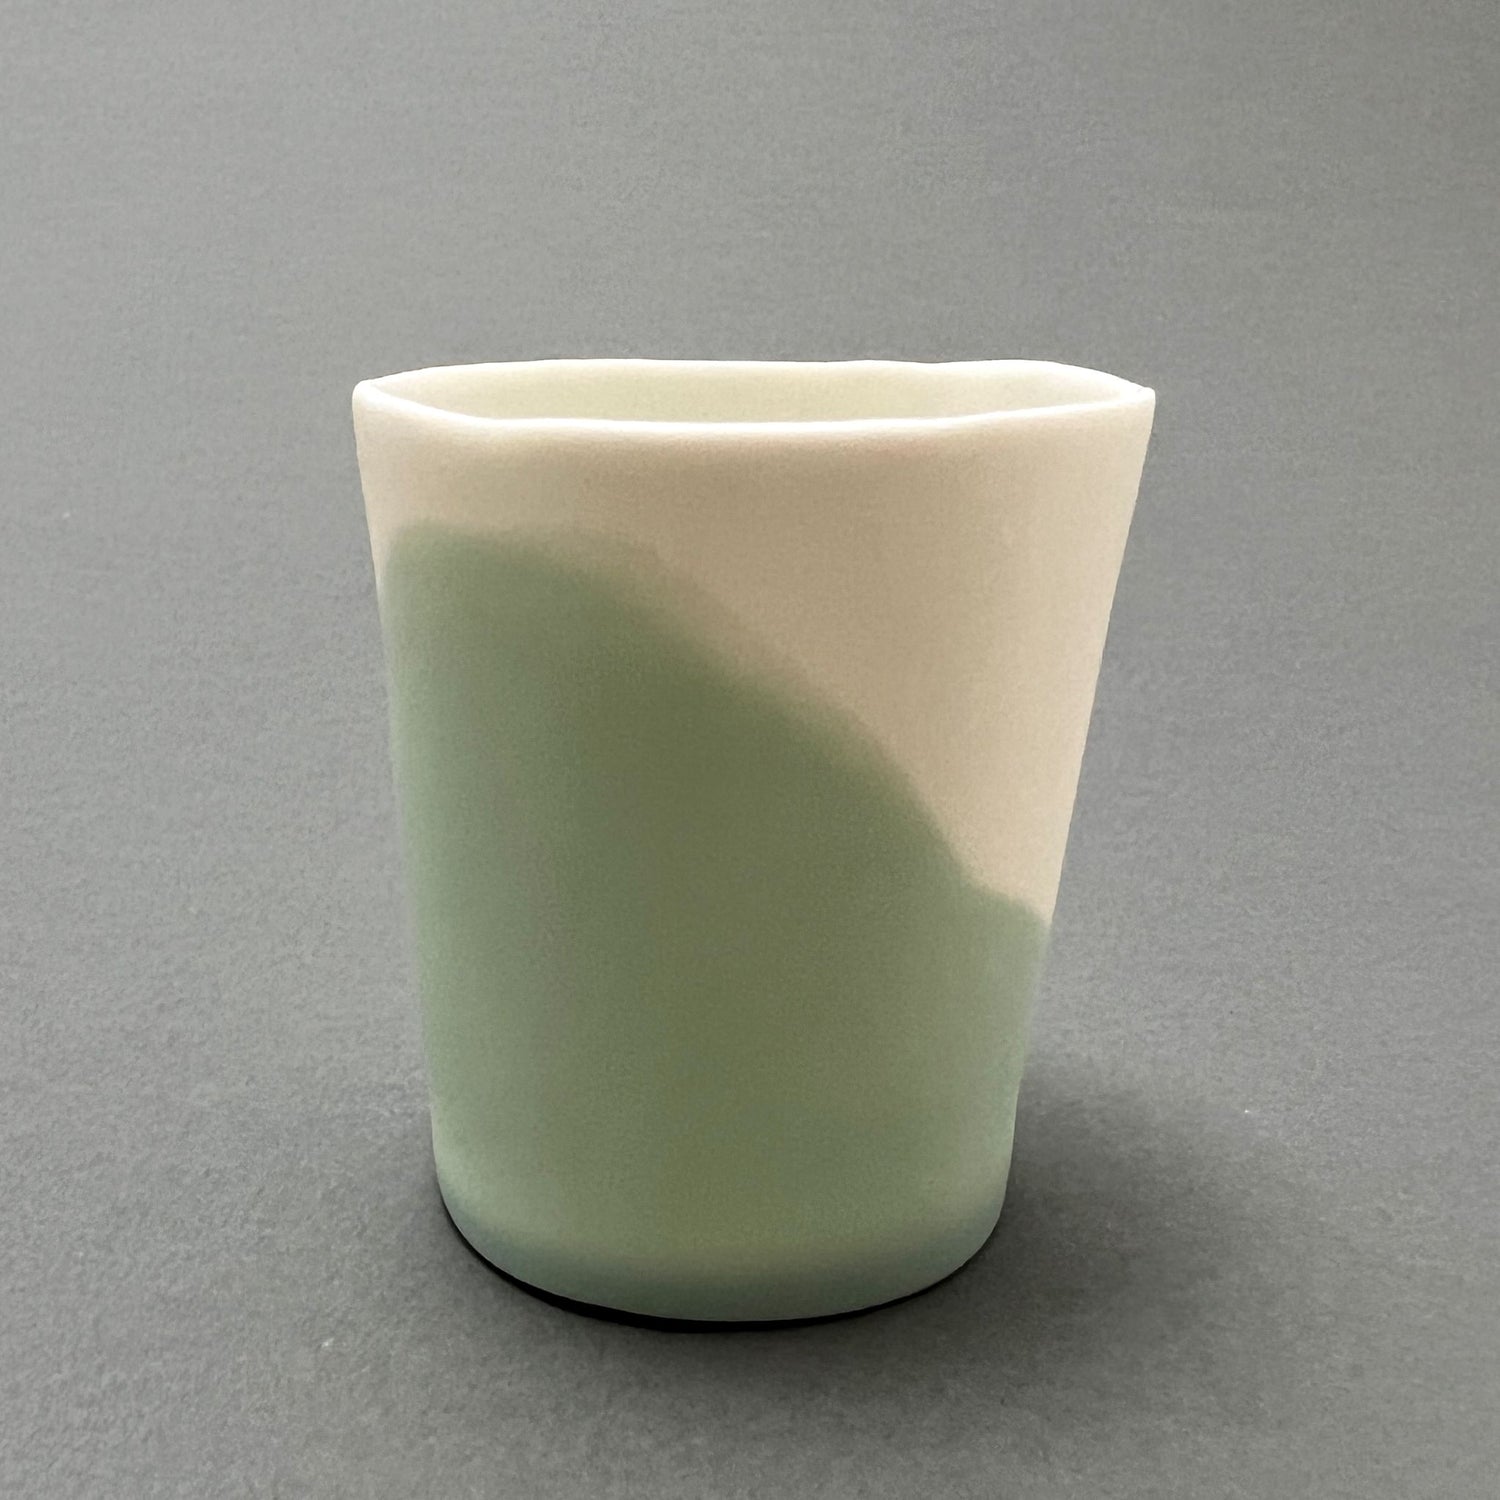 A small aqua blue and white colored porcelain cup standing on a gray background